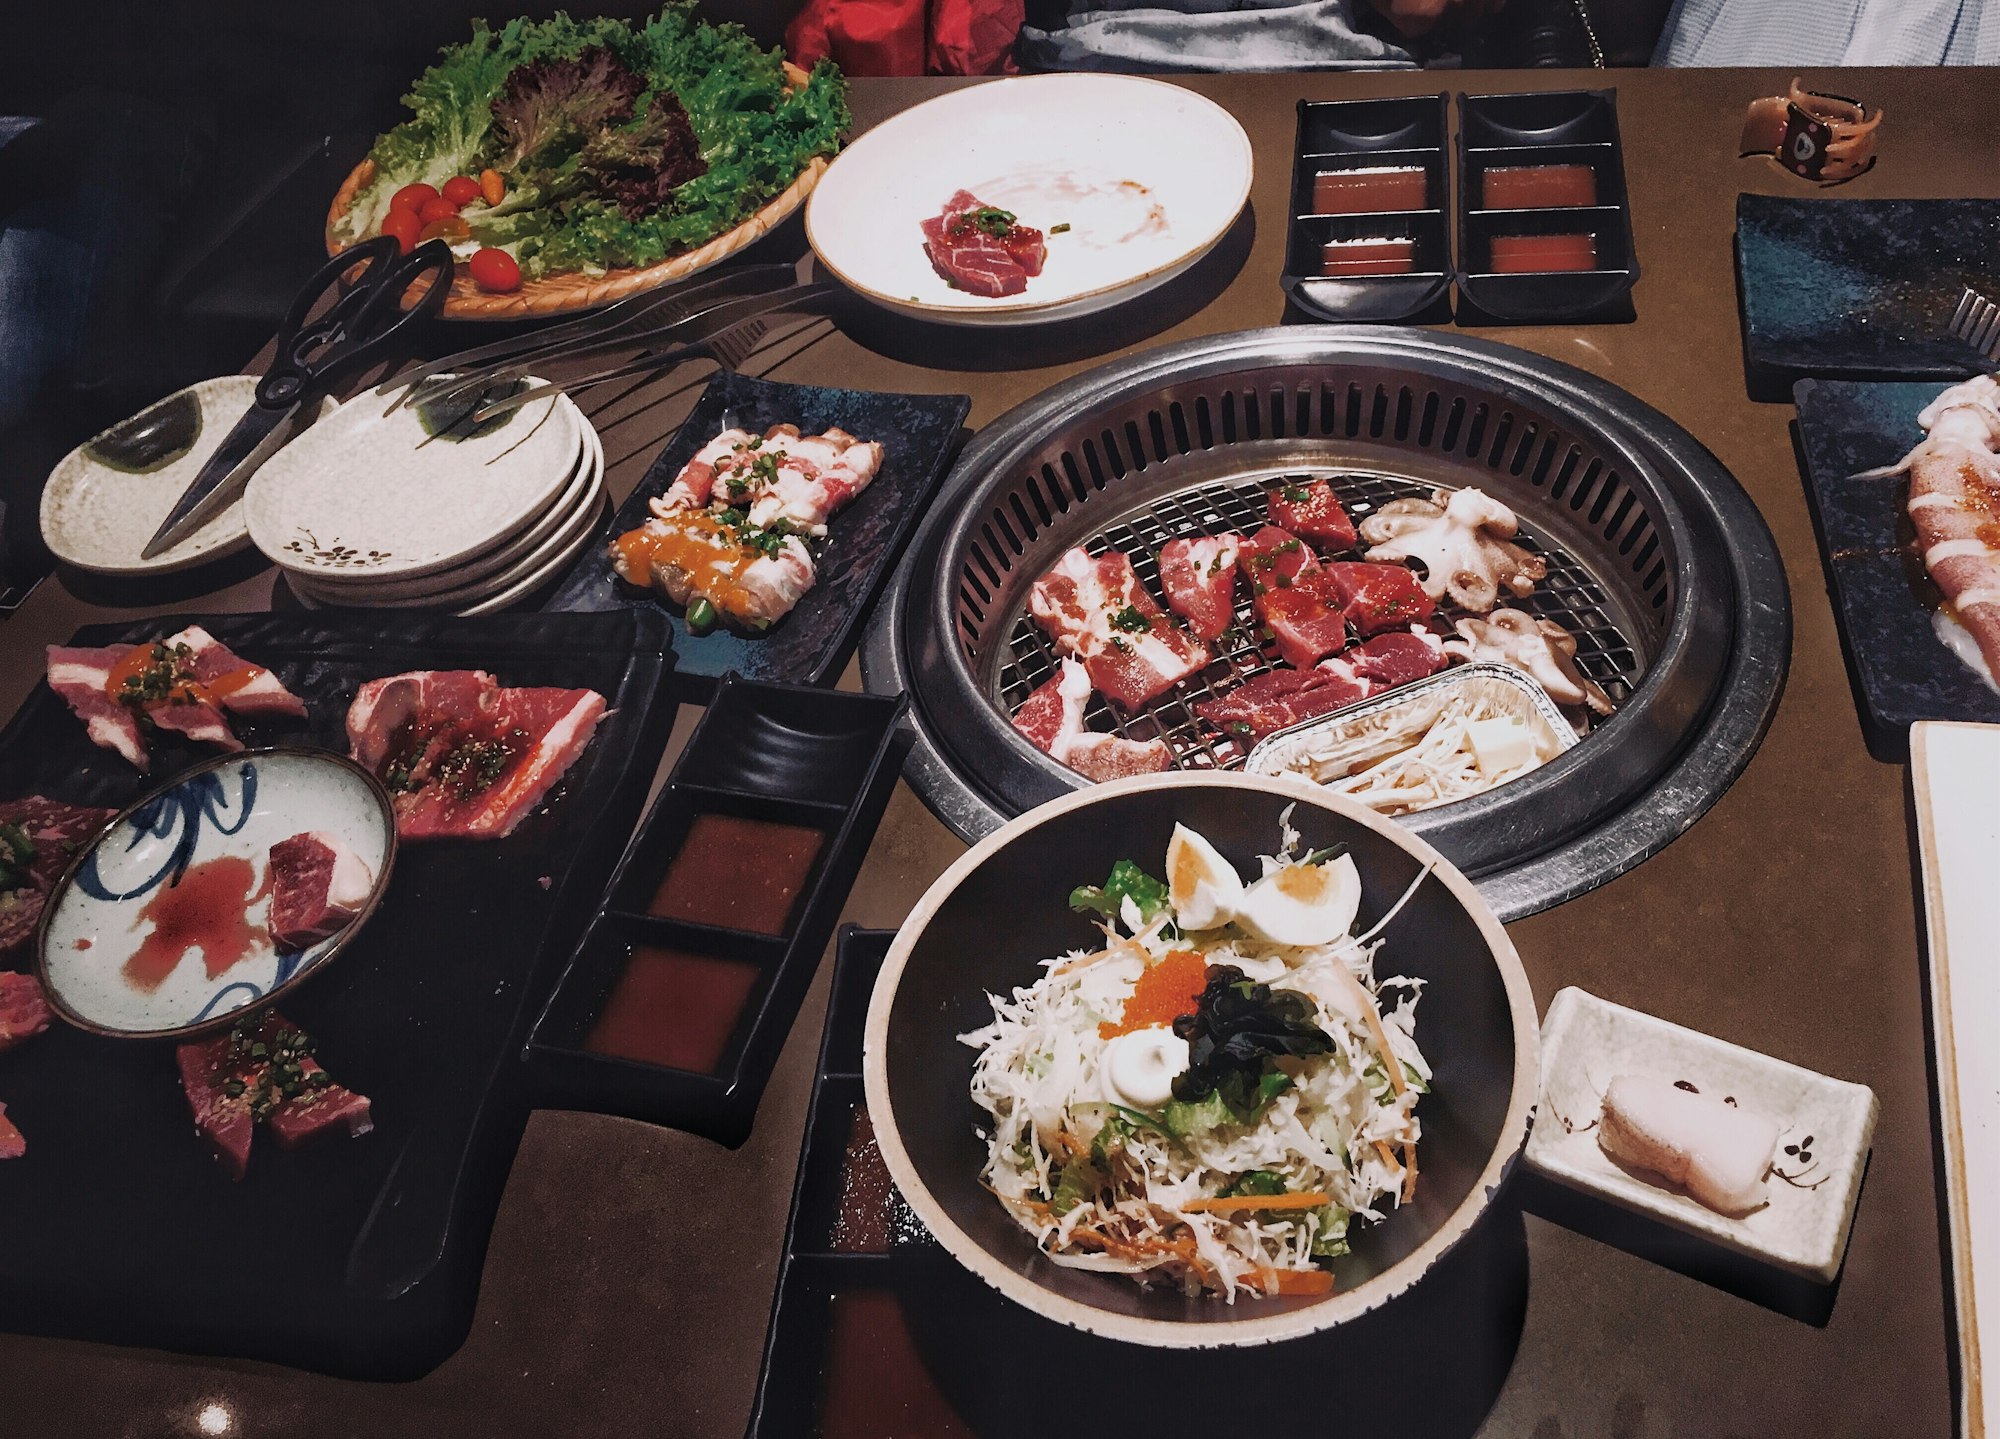 Korean BBQ 101: A Guide to Grilling Your Own Meat